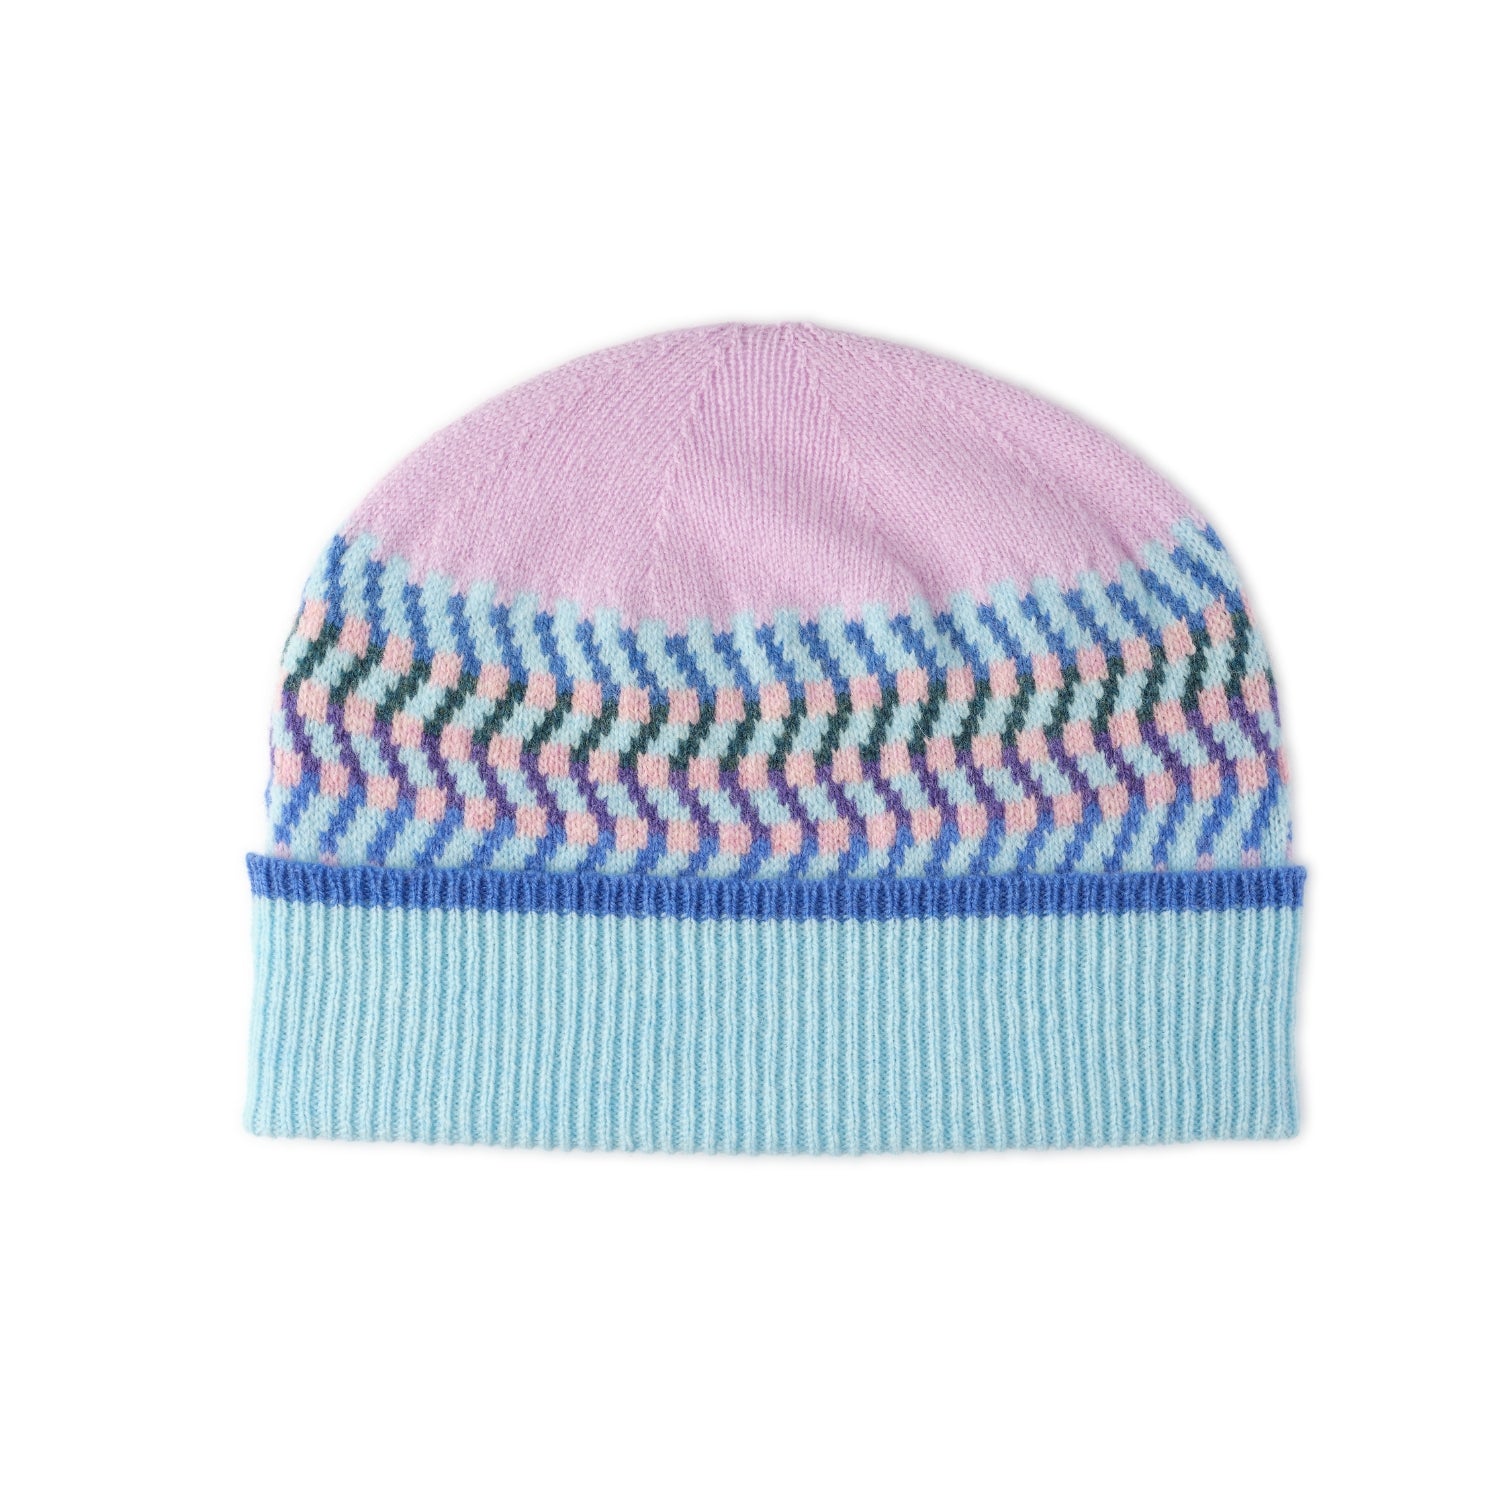 womens wool beanie hat in contemporary design - blue